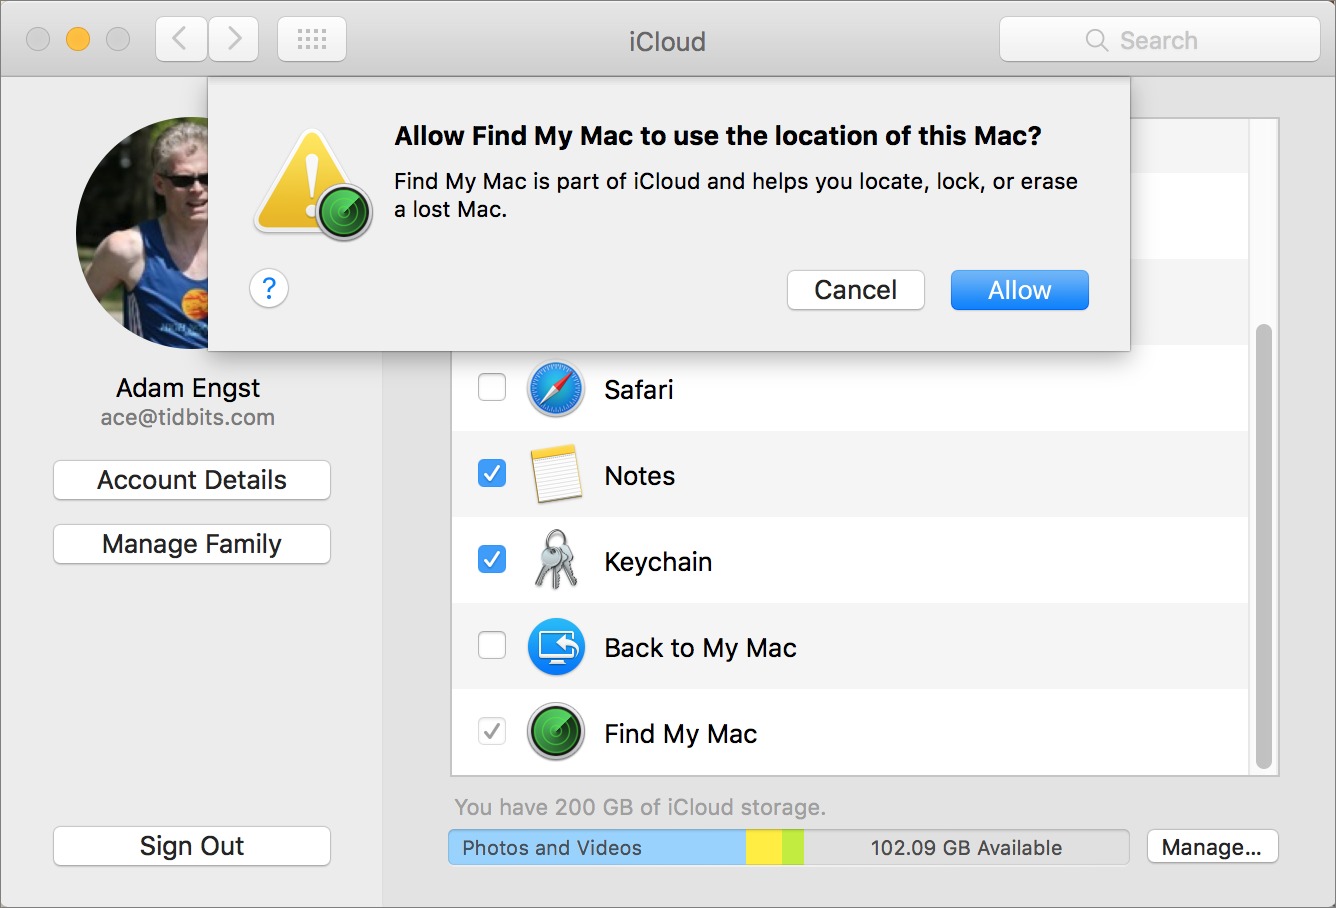 get my mac to stop asking for my password?